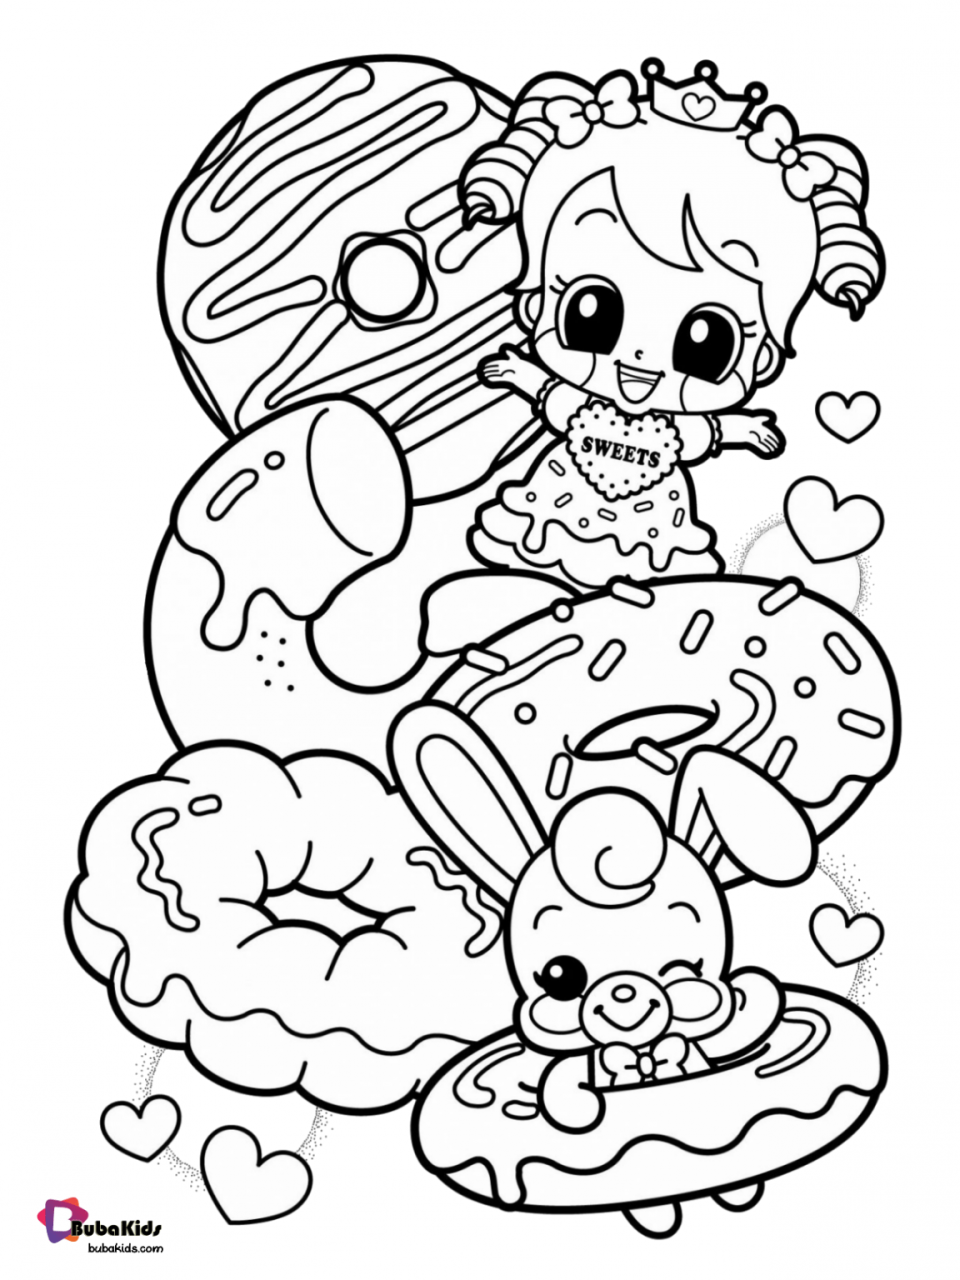 Donut Colouring Pages